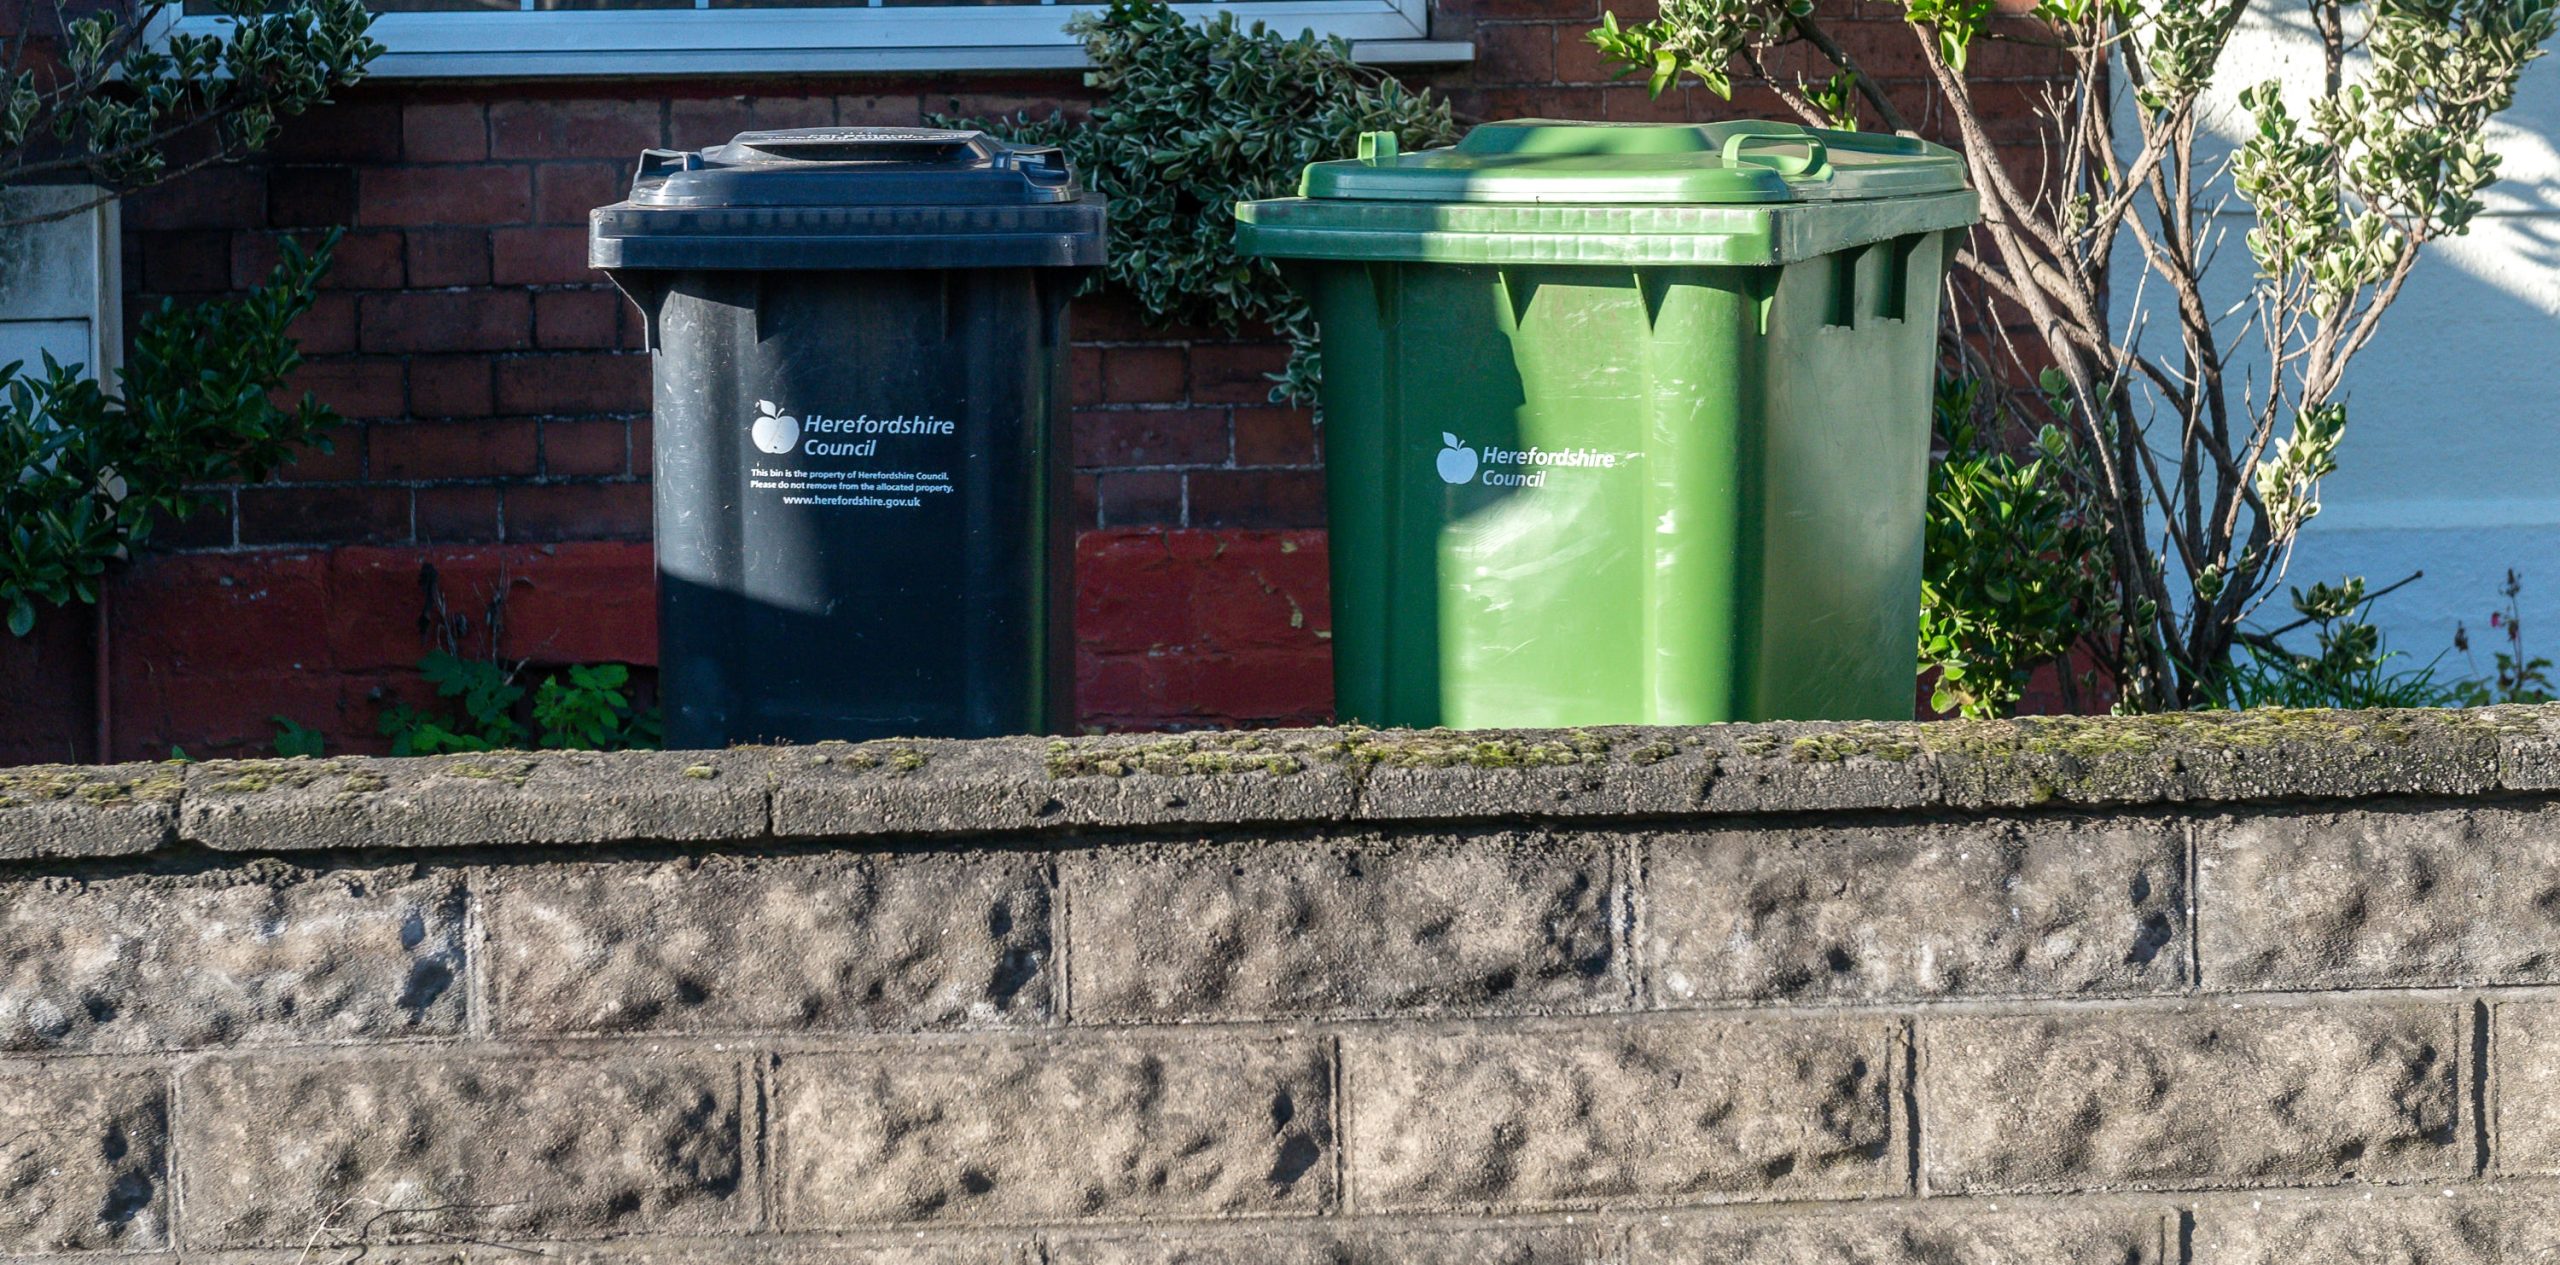 NEWS | New rubbish and recycling collections being introduced from late 2023 in Herefordshire – FULL DETAILS